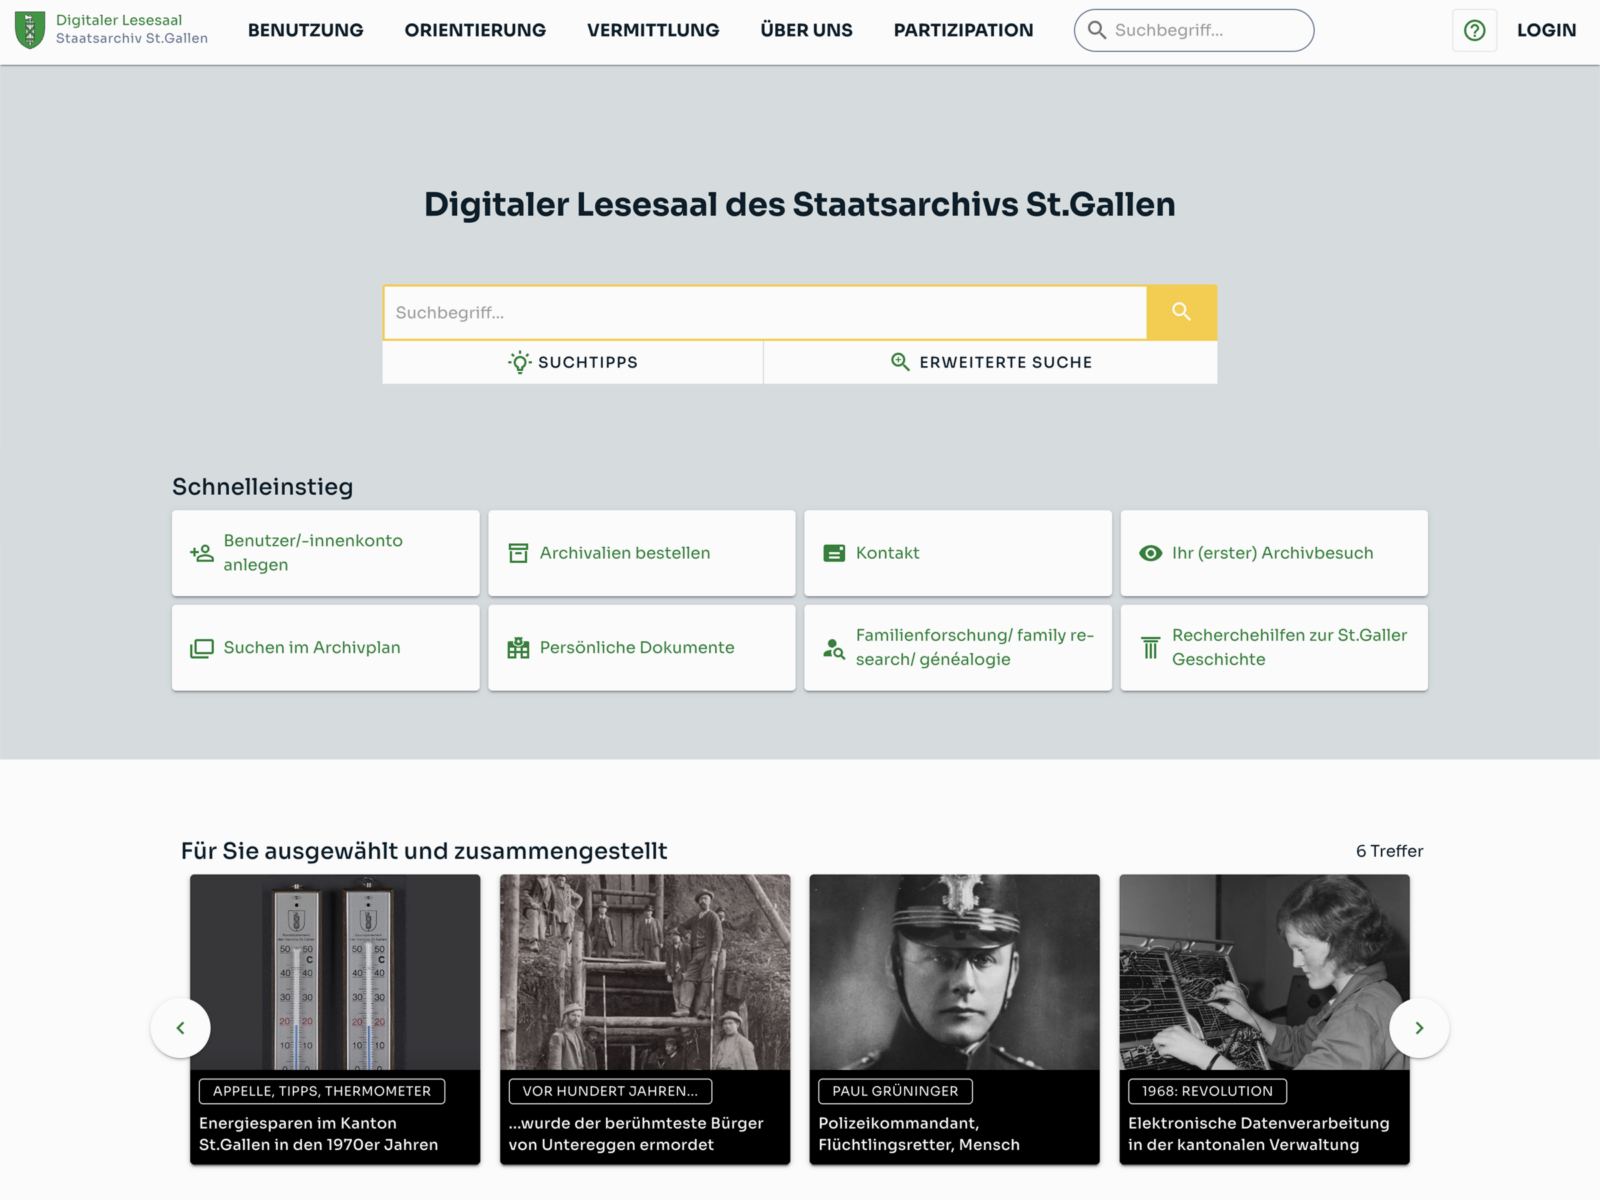 Screen design of the digital service design application of the State Archive St. Gallen.